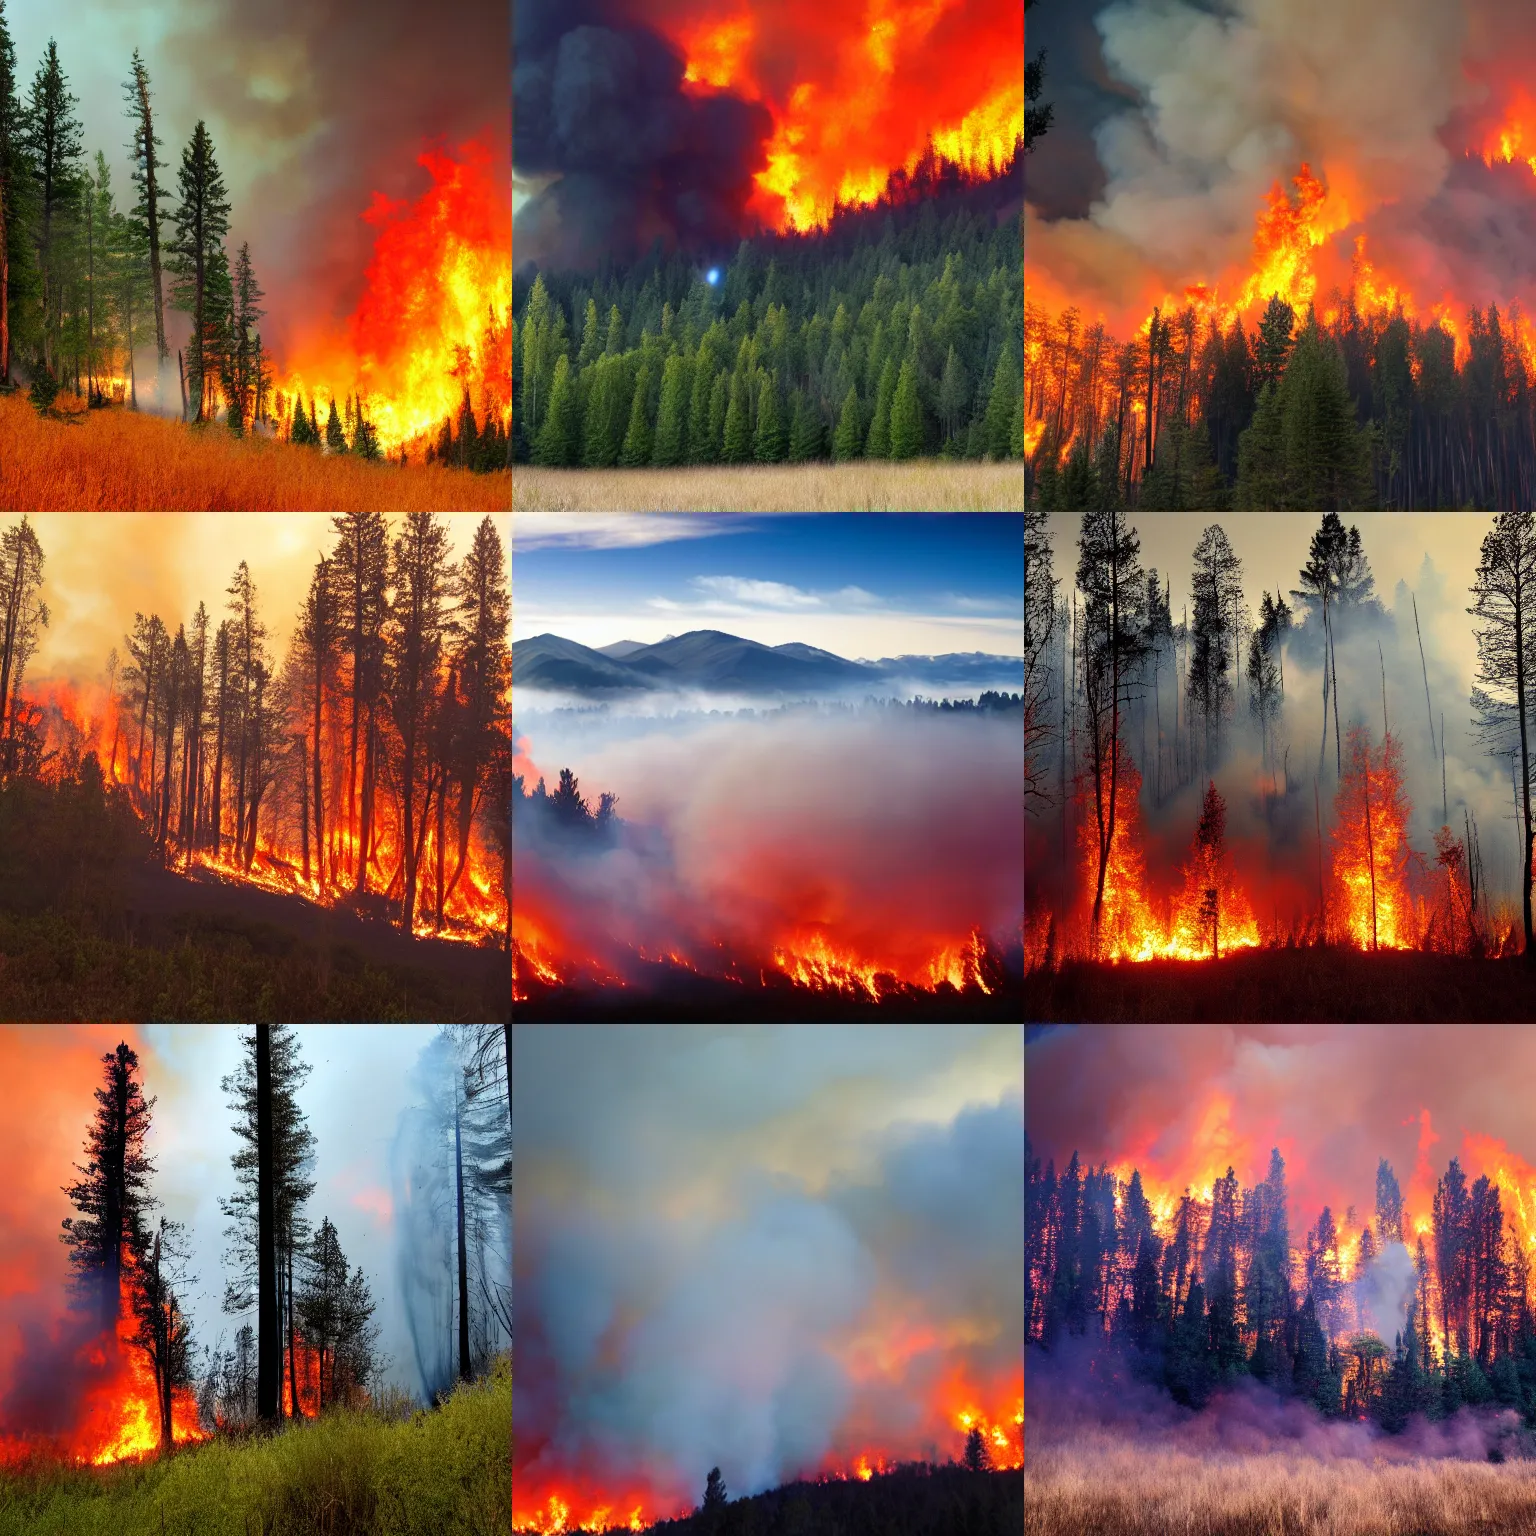 Prompt: A raging forest fire on the Windows desktop background, smoke, ash